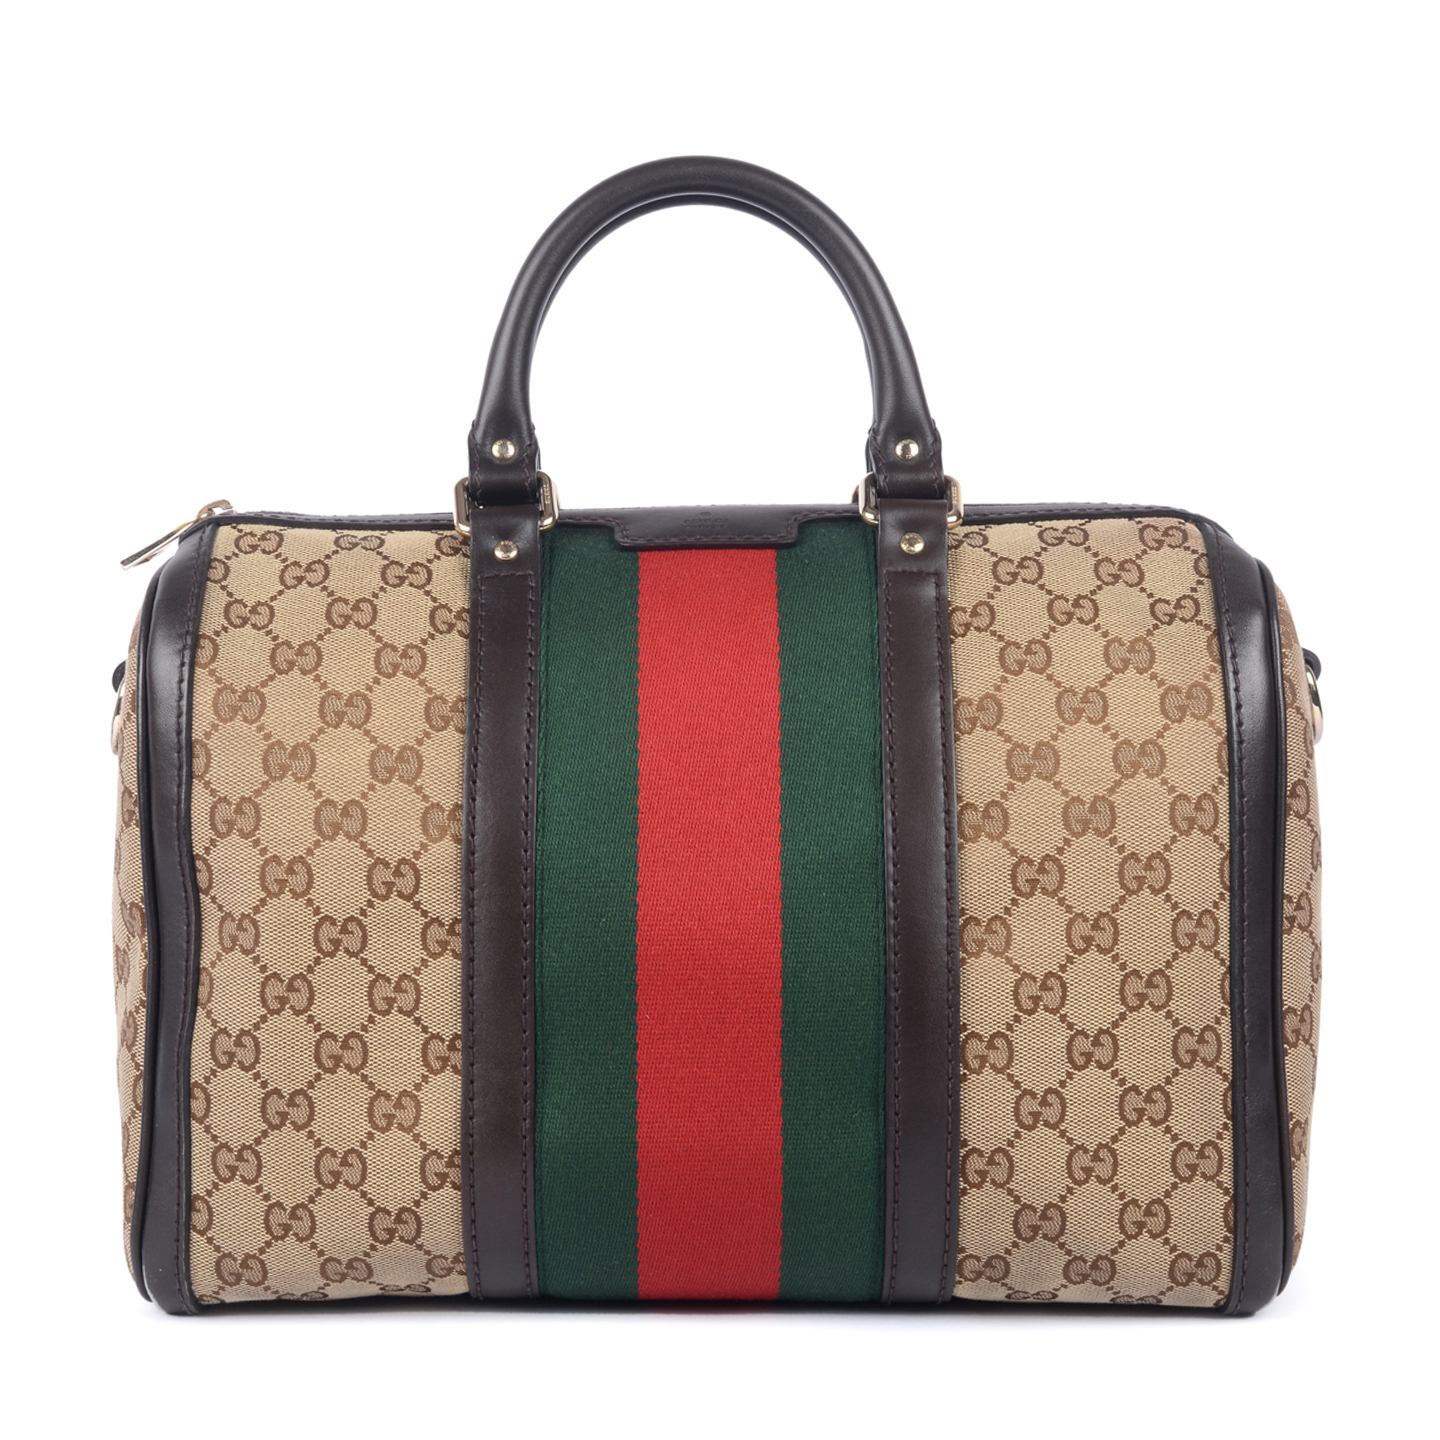 Gucci Sling Bags Price In India | SEMA Data Co-op